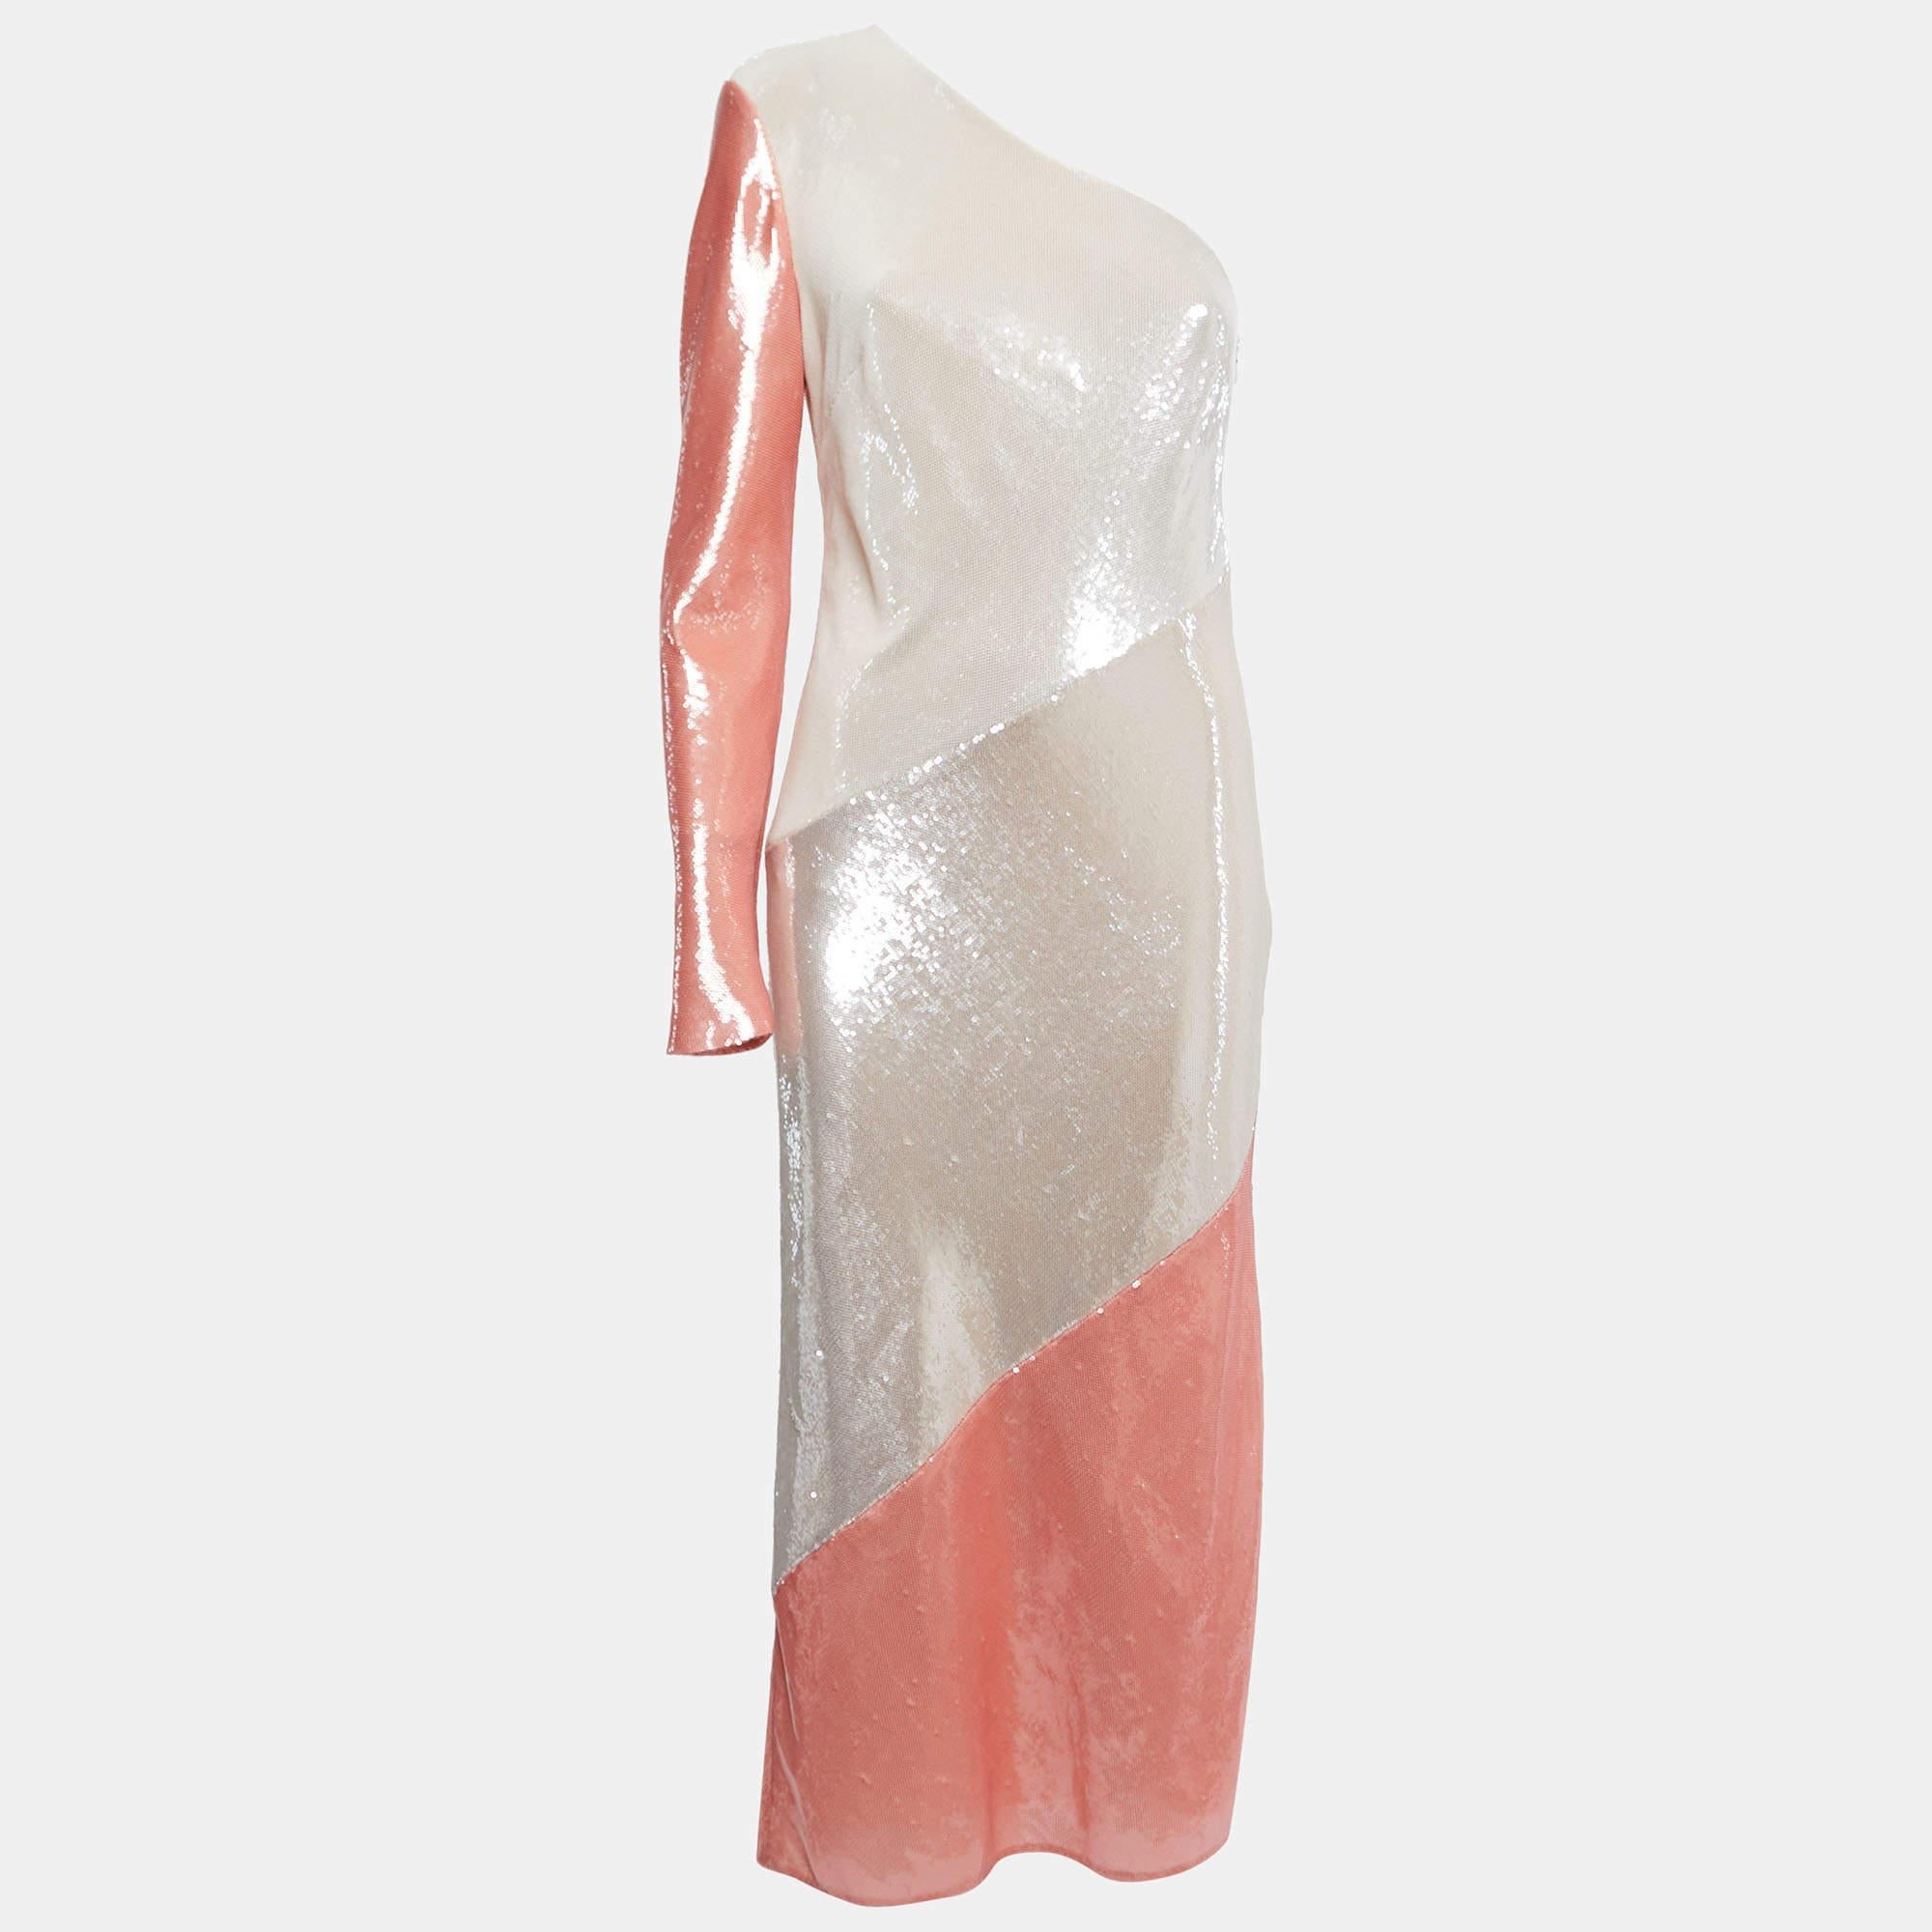 The Diane Von Furstenberg midi dress is a stunning piece that exudes elegance and glamour. The dress features intricate sequin detailing in a beautiful white and pink color palette, creating a mesmerizing visual effect. With its one-shoulder design